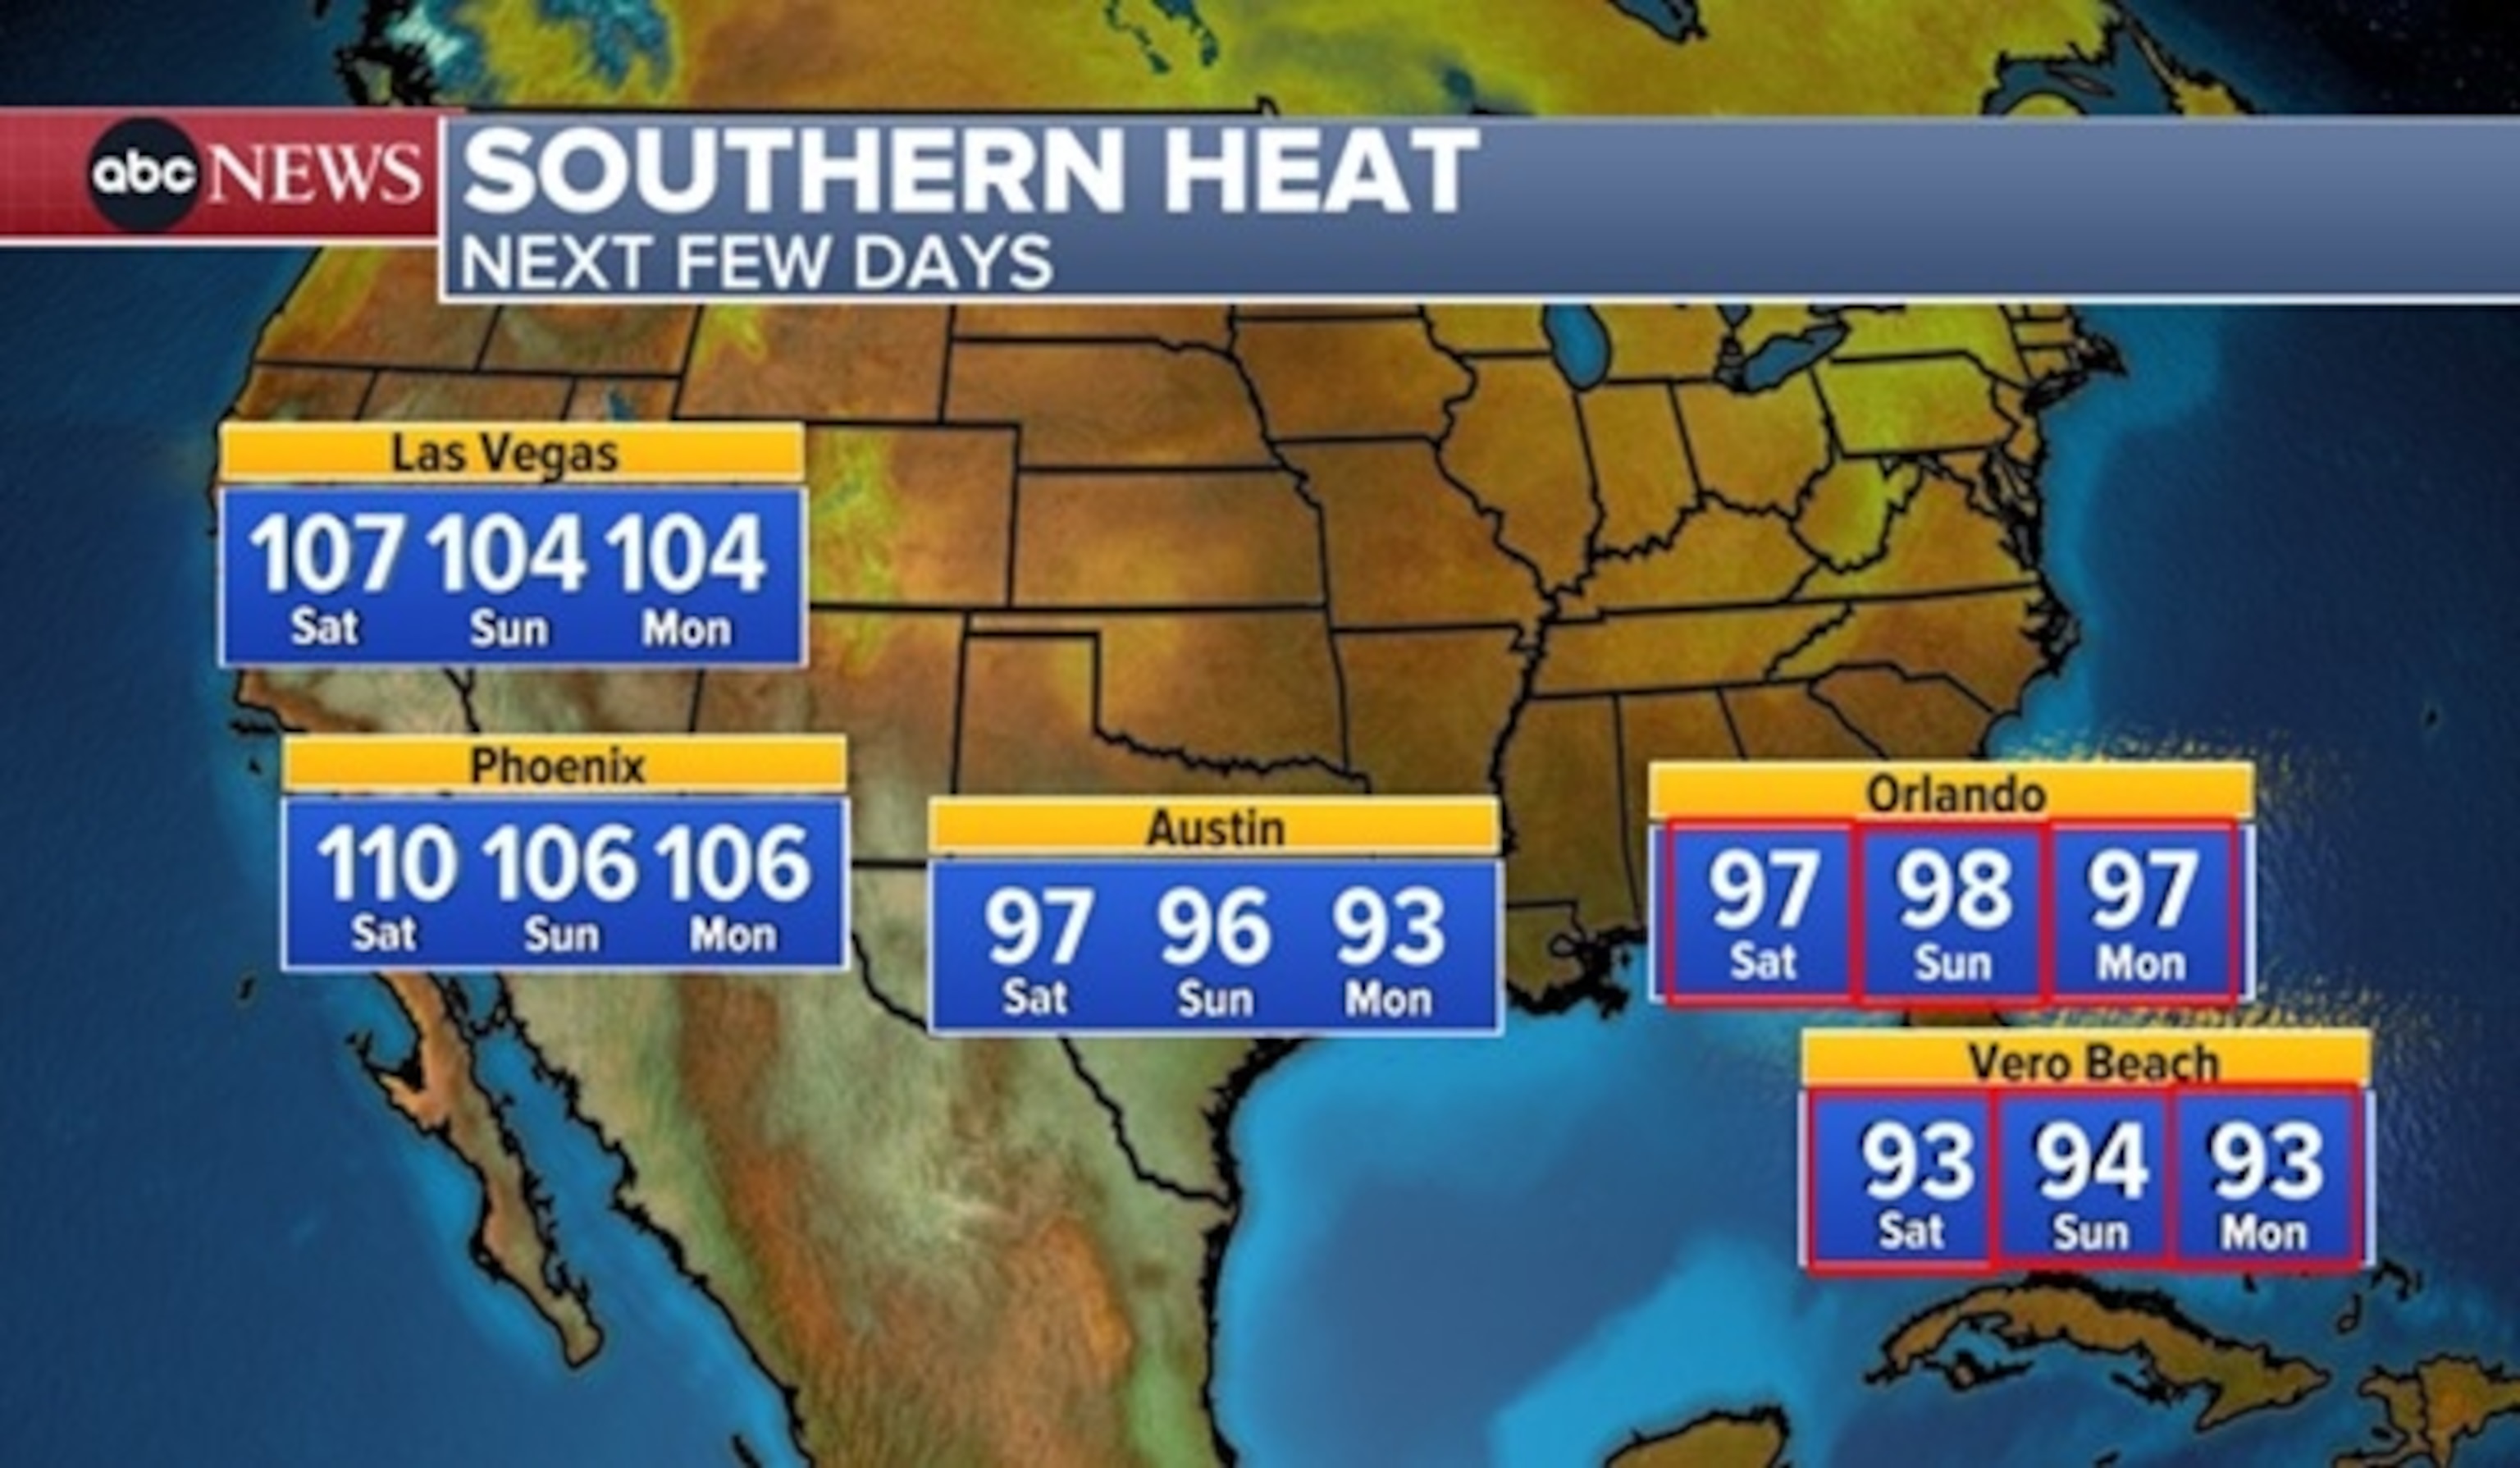 PHOTO: Southern heat graphic